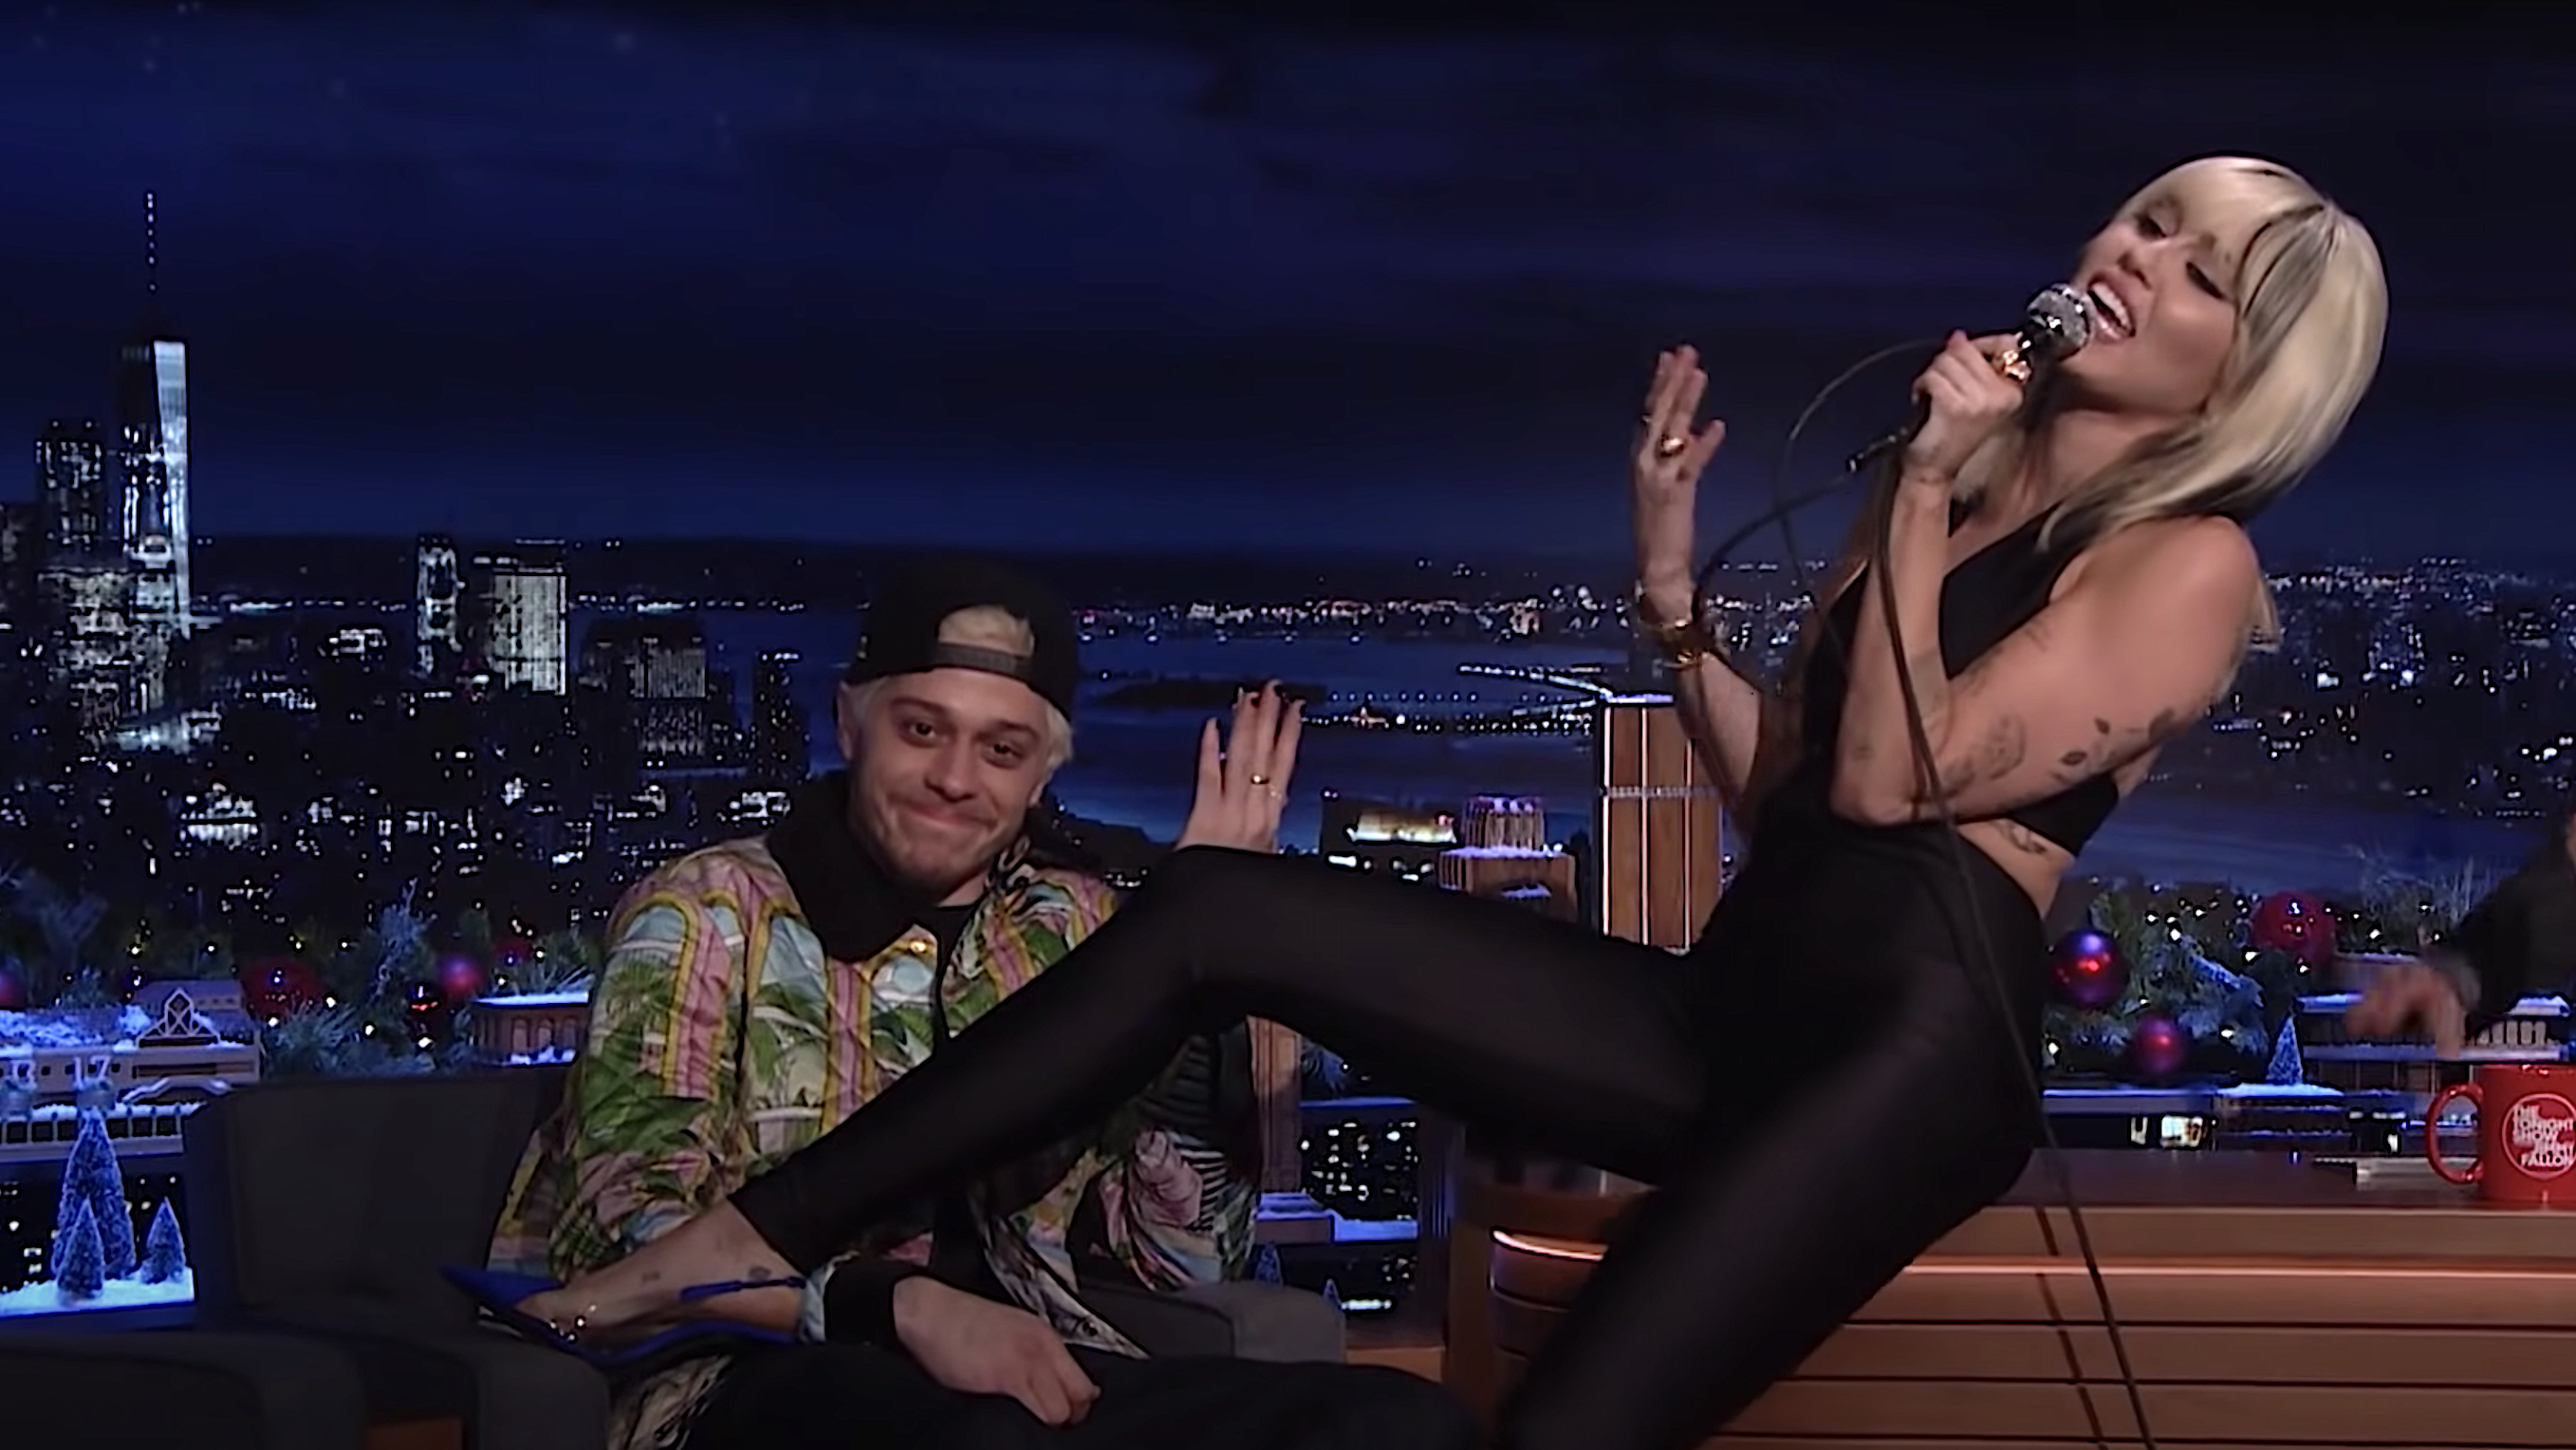 Fueling inevitable gossip, Miley Cyrus croons “It Should Have Been Me” to Pete Davidson